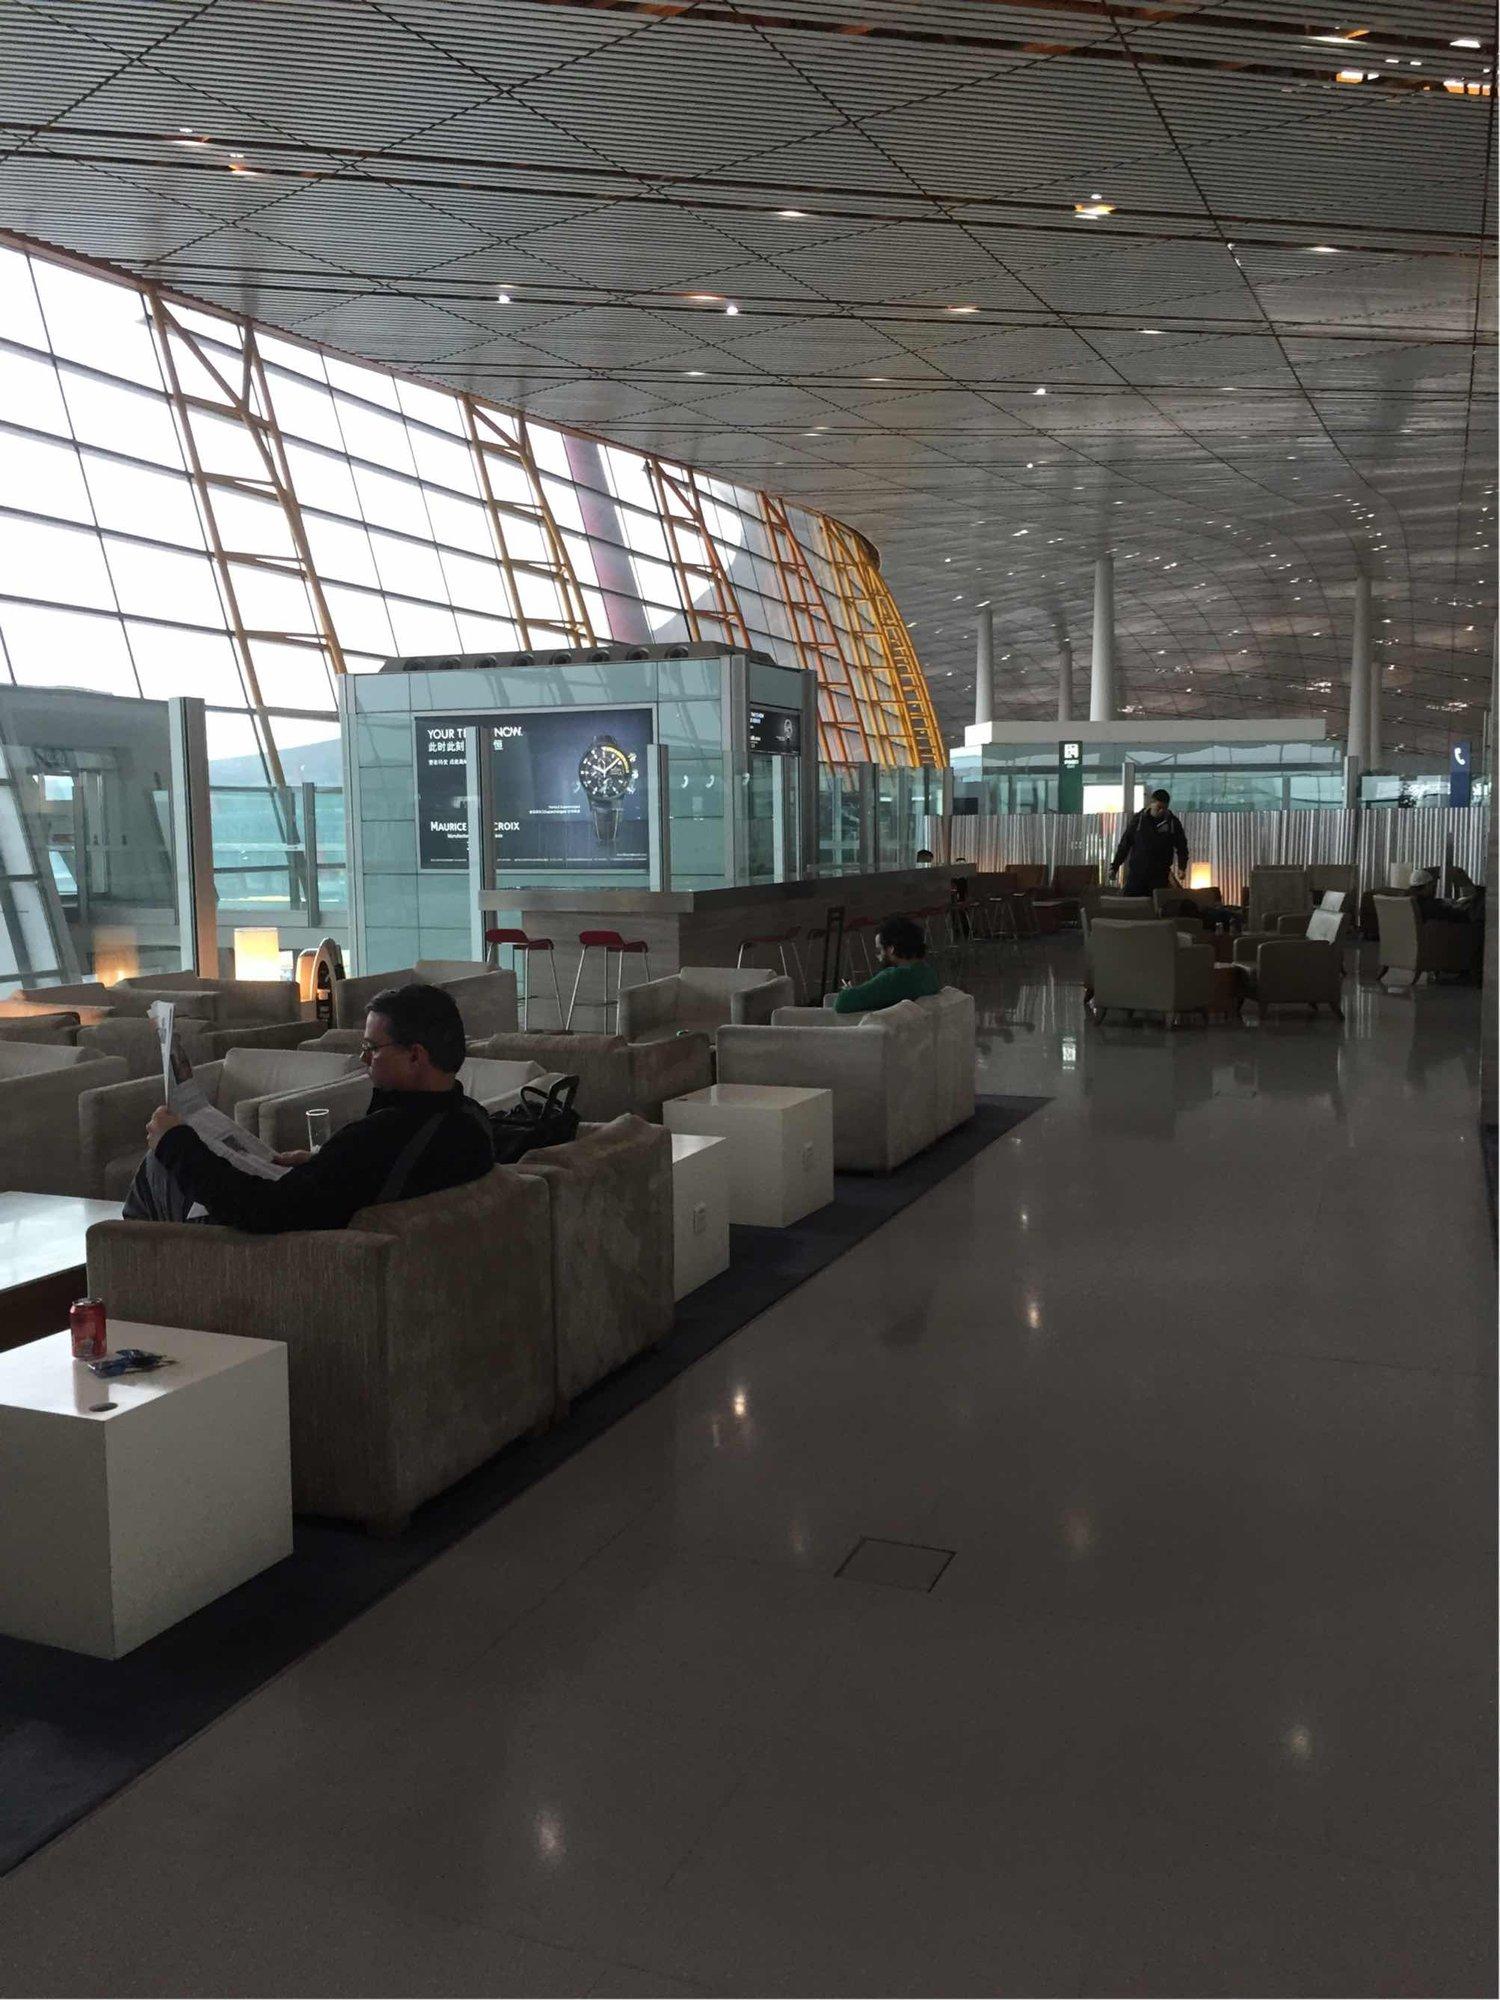 Cathay Pacific Lounge image 2 of 17